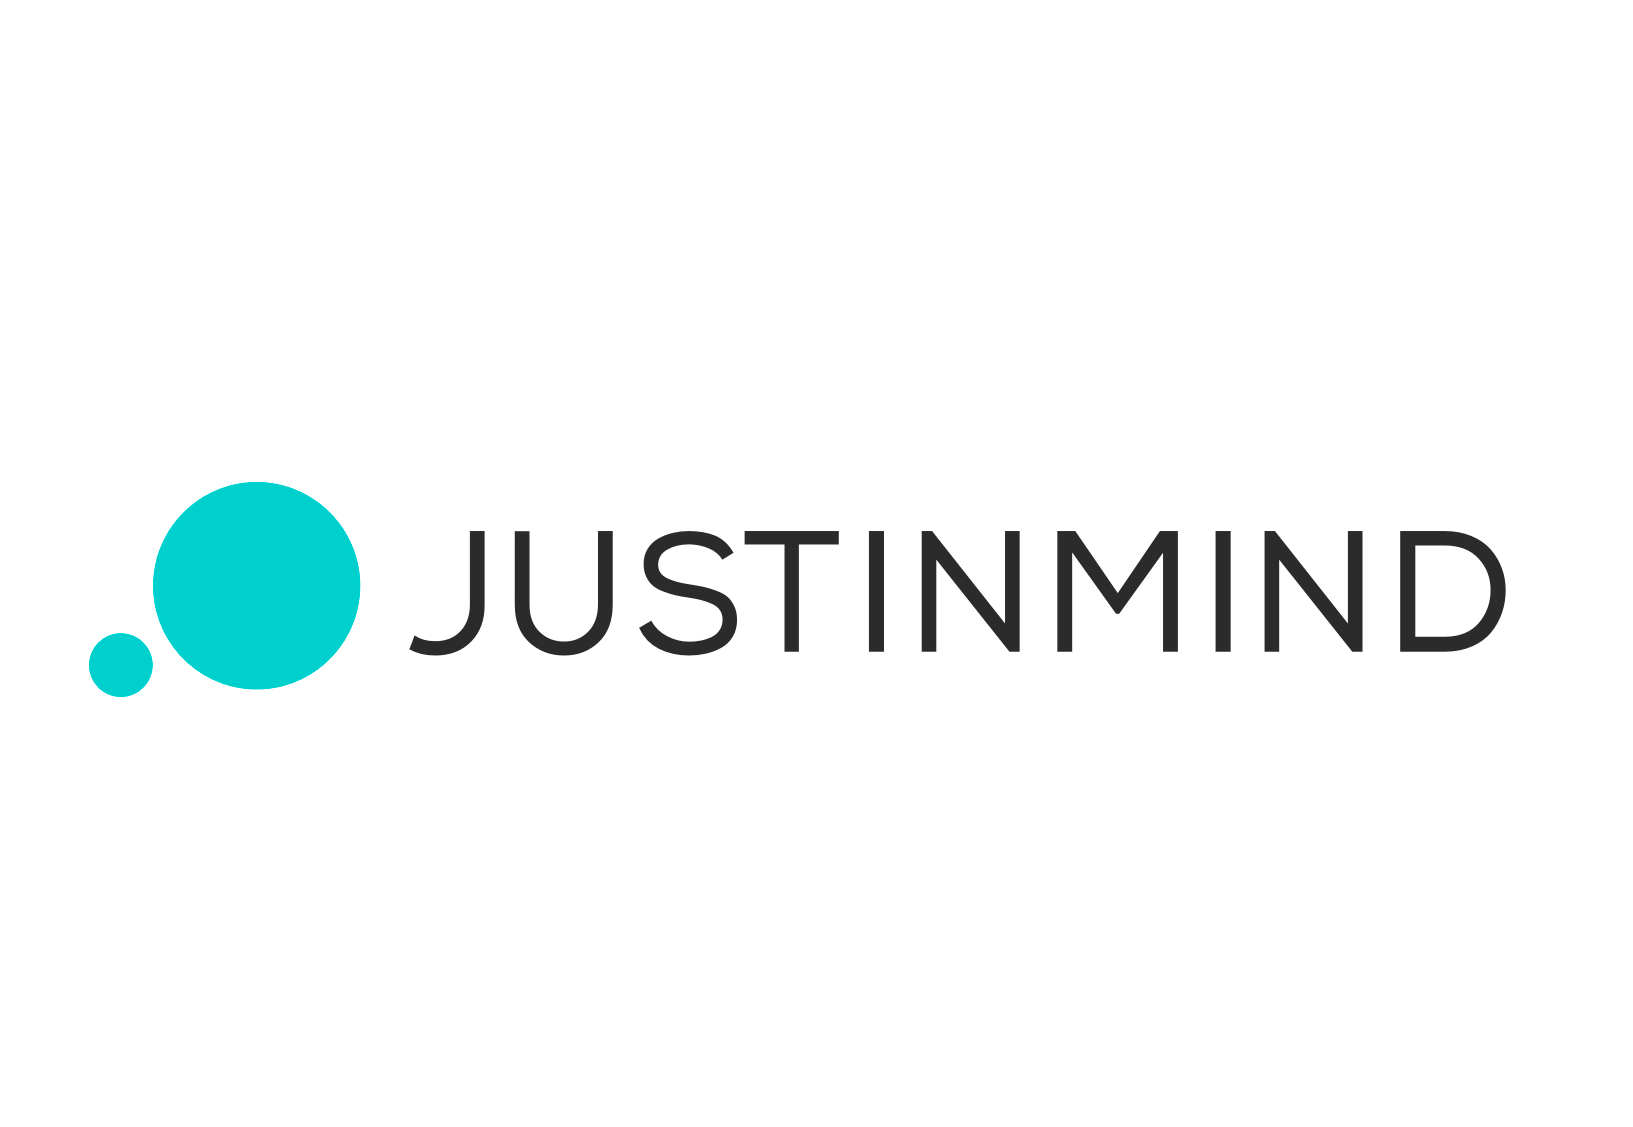 justinmind used for